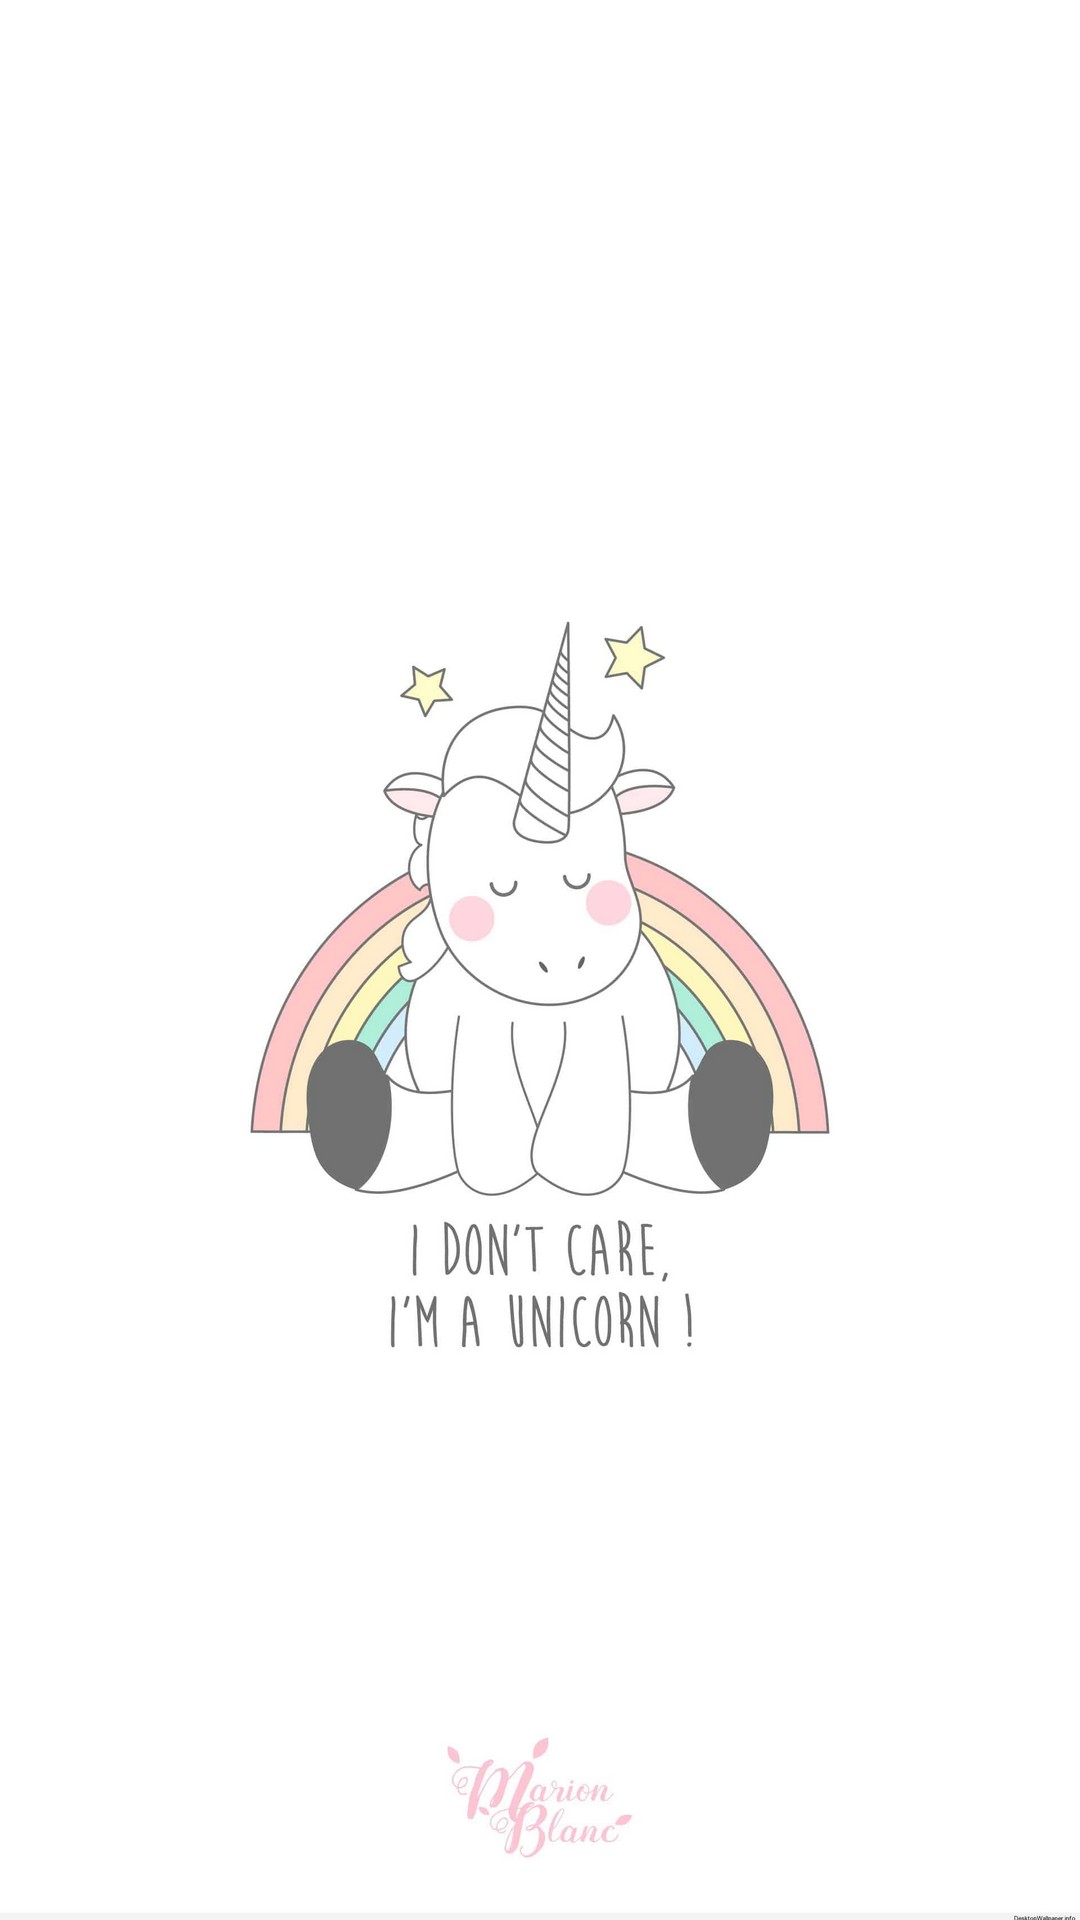 Cute Girly Unicorn Wallpaper For Android With high-resolution 1080X1920 pixel. You can use this wallpaper for your Android backgrounds, Tablet, Samsung Screensavers, Mobile Phone Lock Screen and another Smartphones device